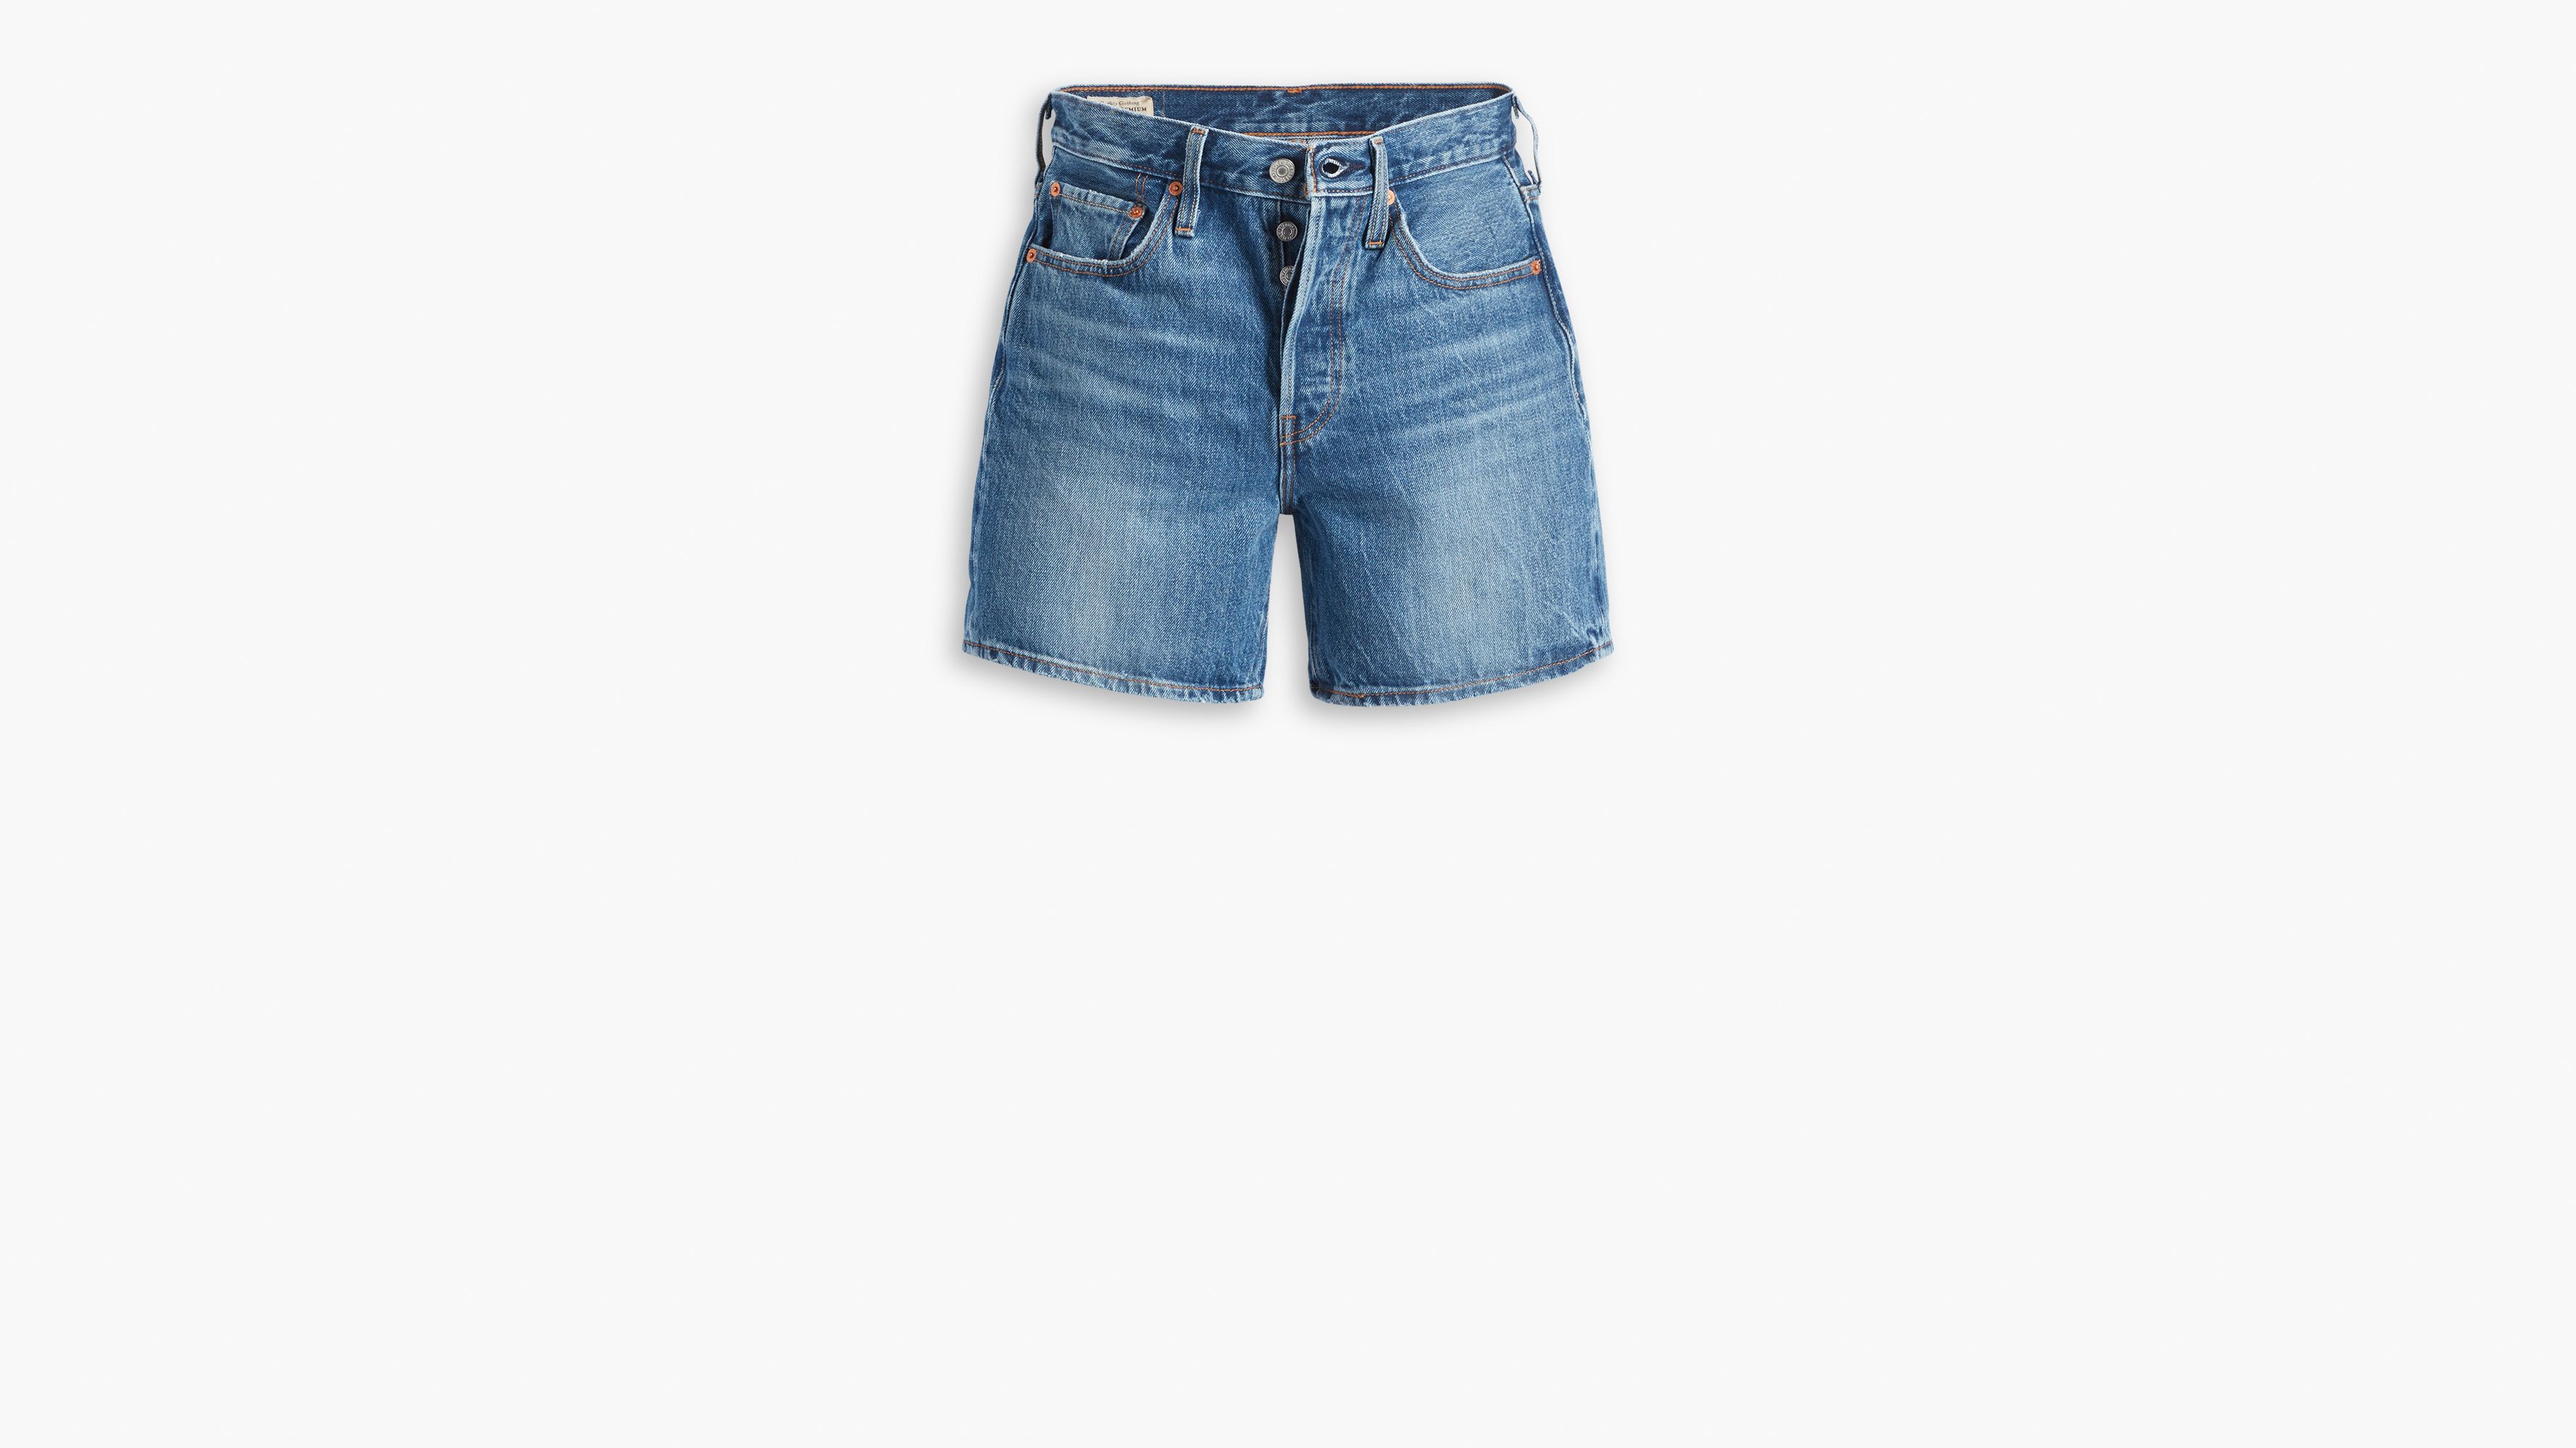 Levi's 501® Mid Thigh Women's Jean Shorts - Pleased To Meet You 30 : Target